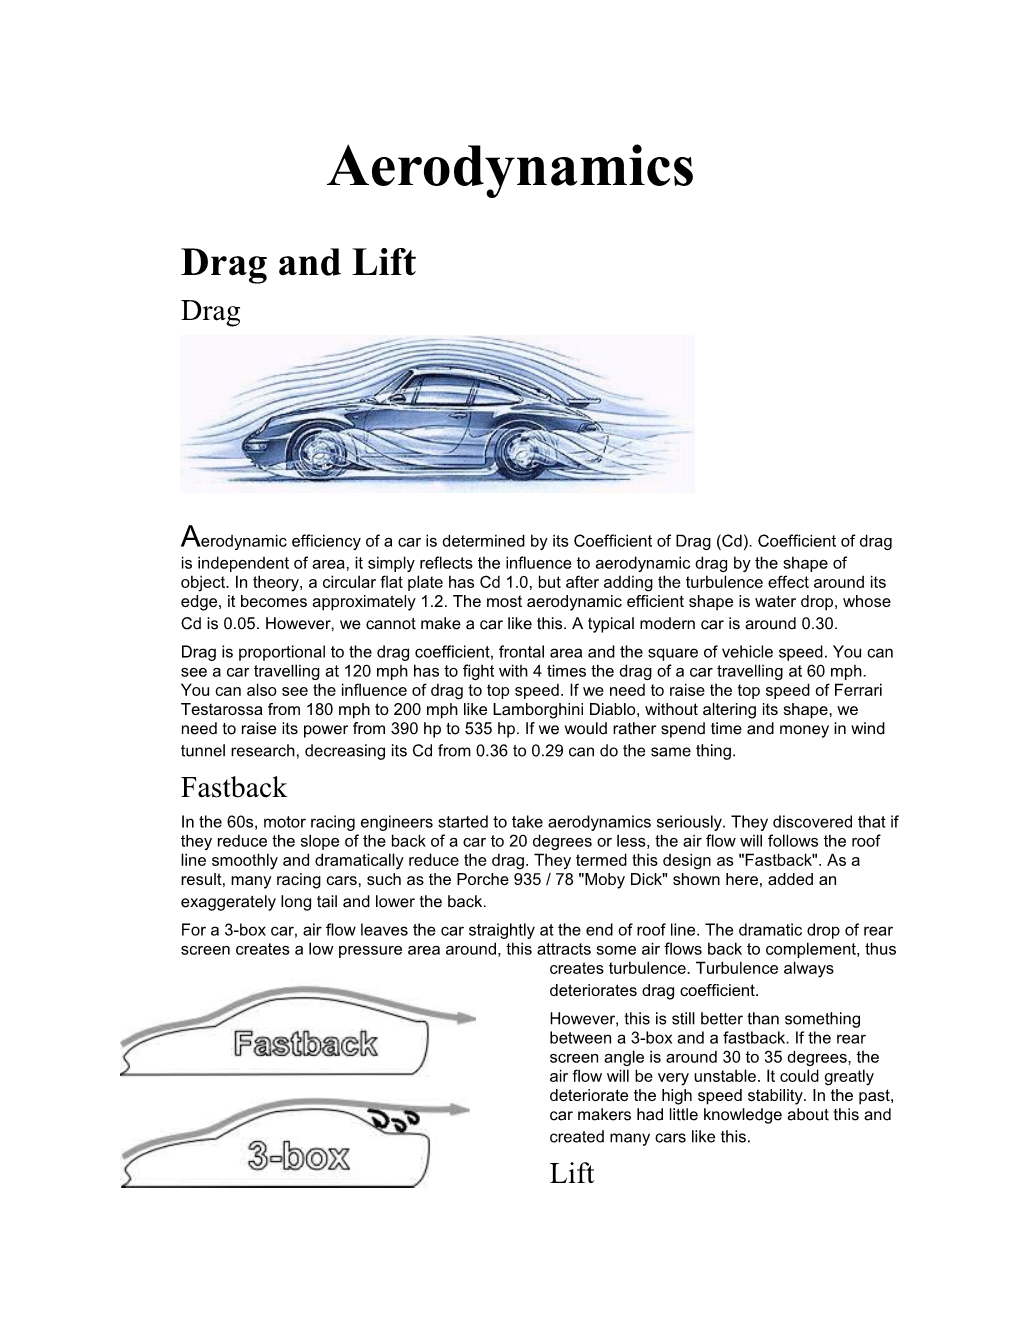 Aerodynamic Efficiency of a Car Is Determined by Its Coefficient of Drag (Cd). Coefficient